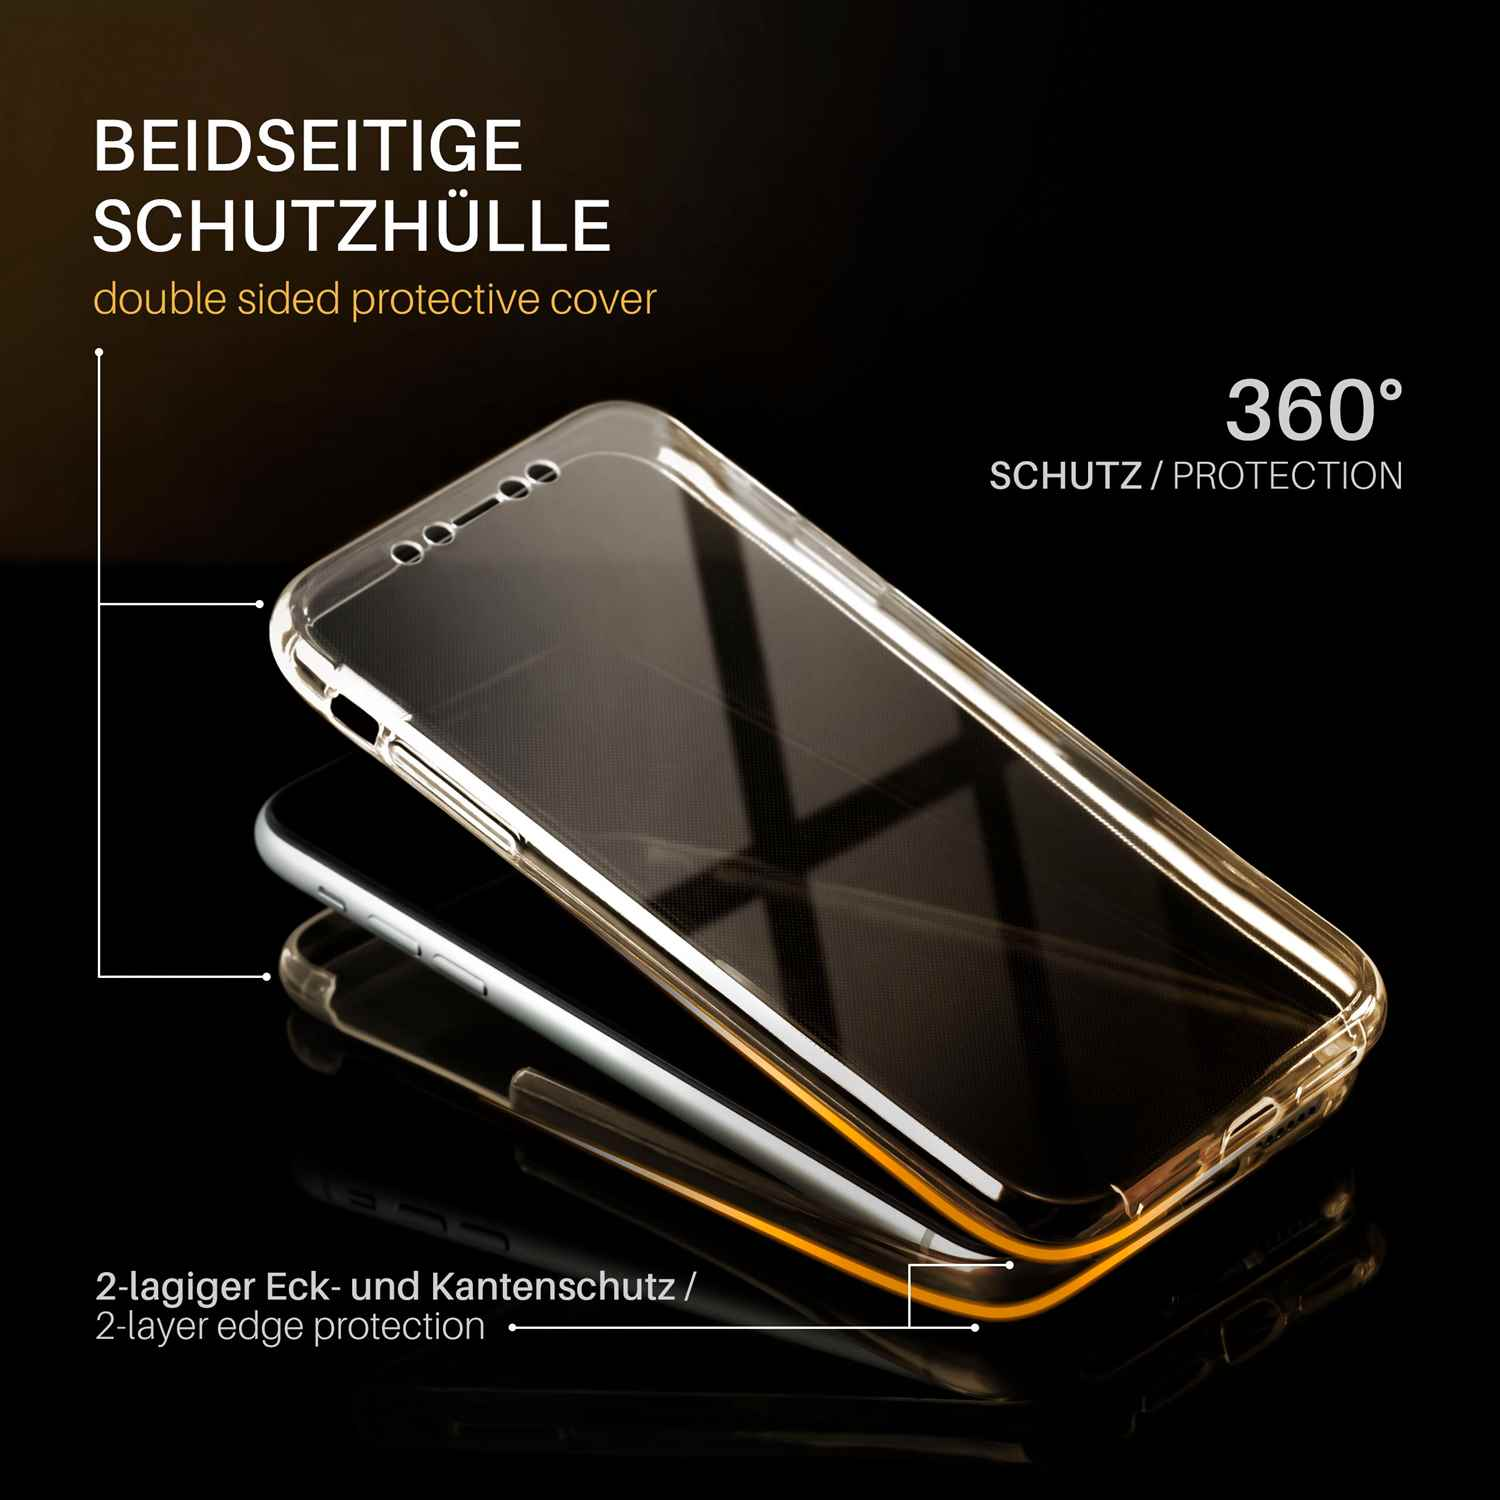 MOEX Full S10 Plus, Gold Galaxy Double Cover, Samsung, Case,